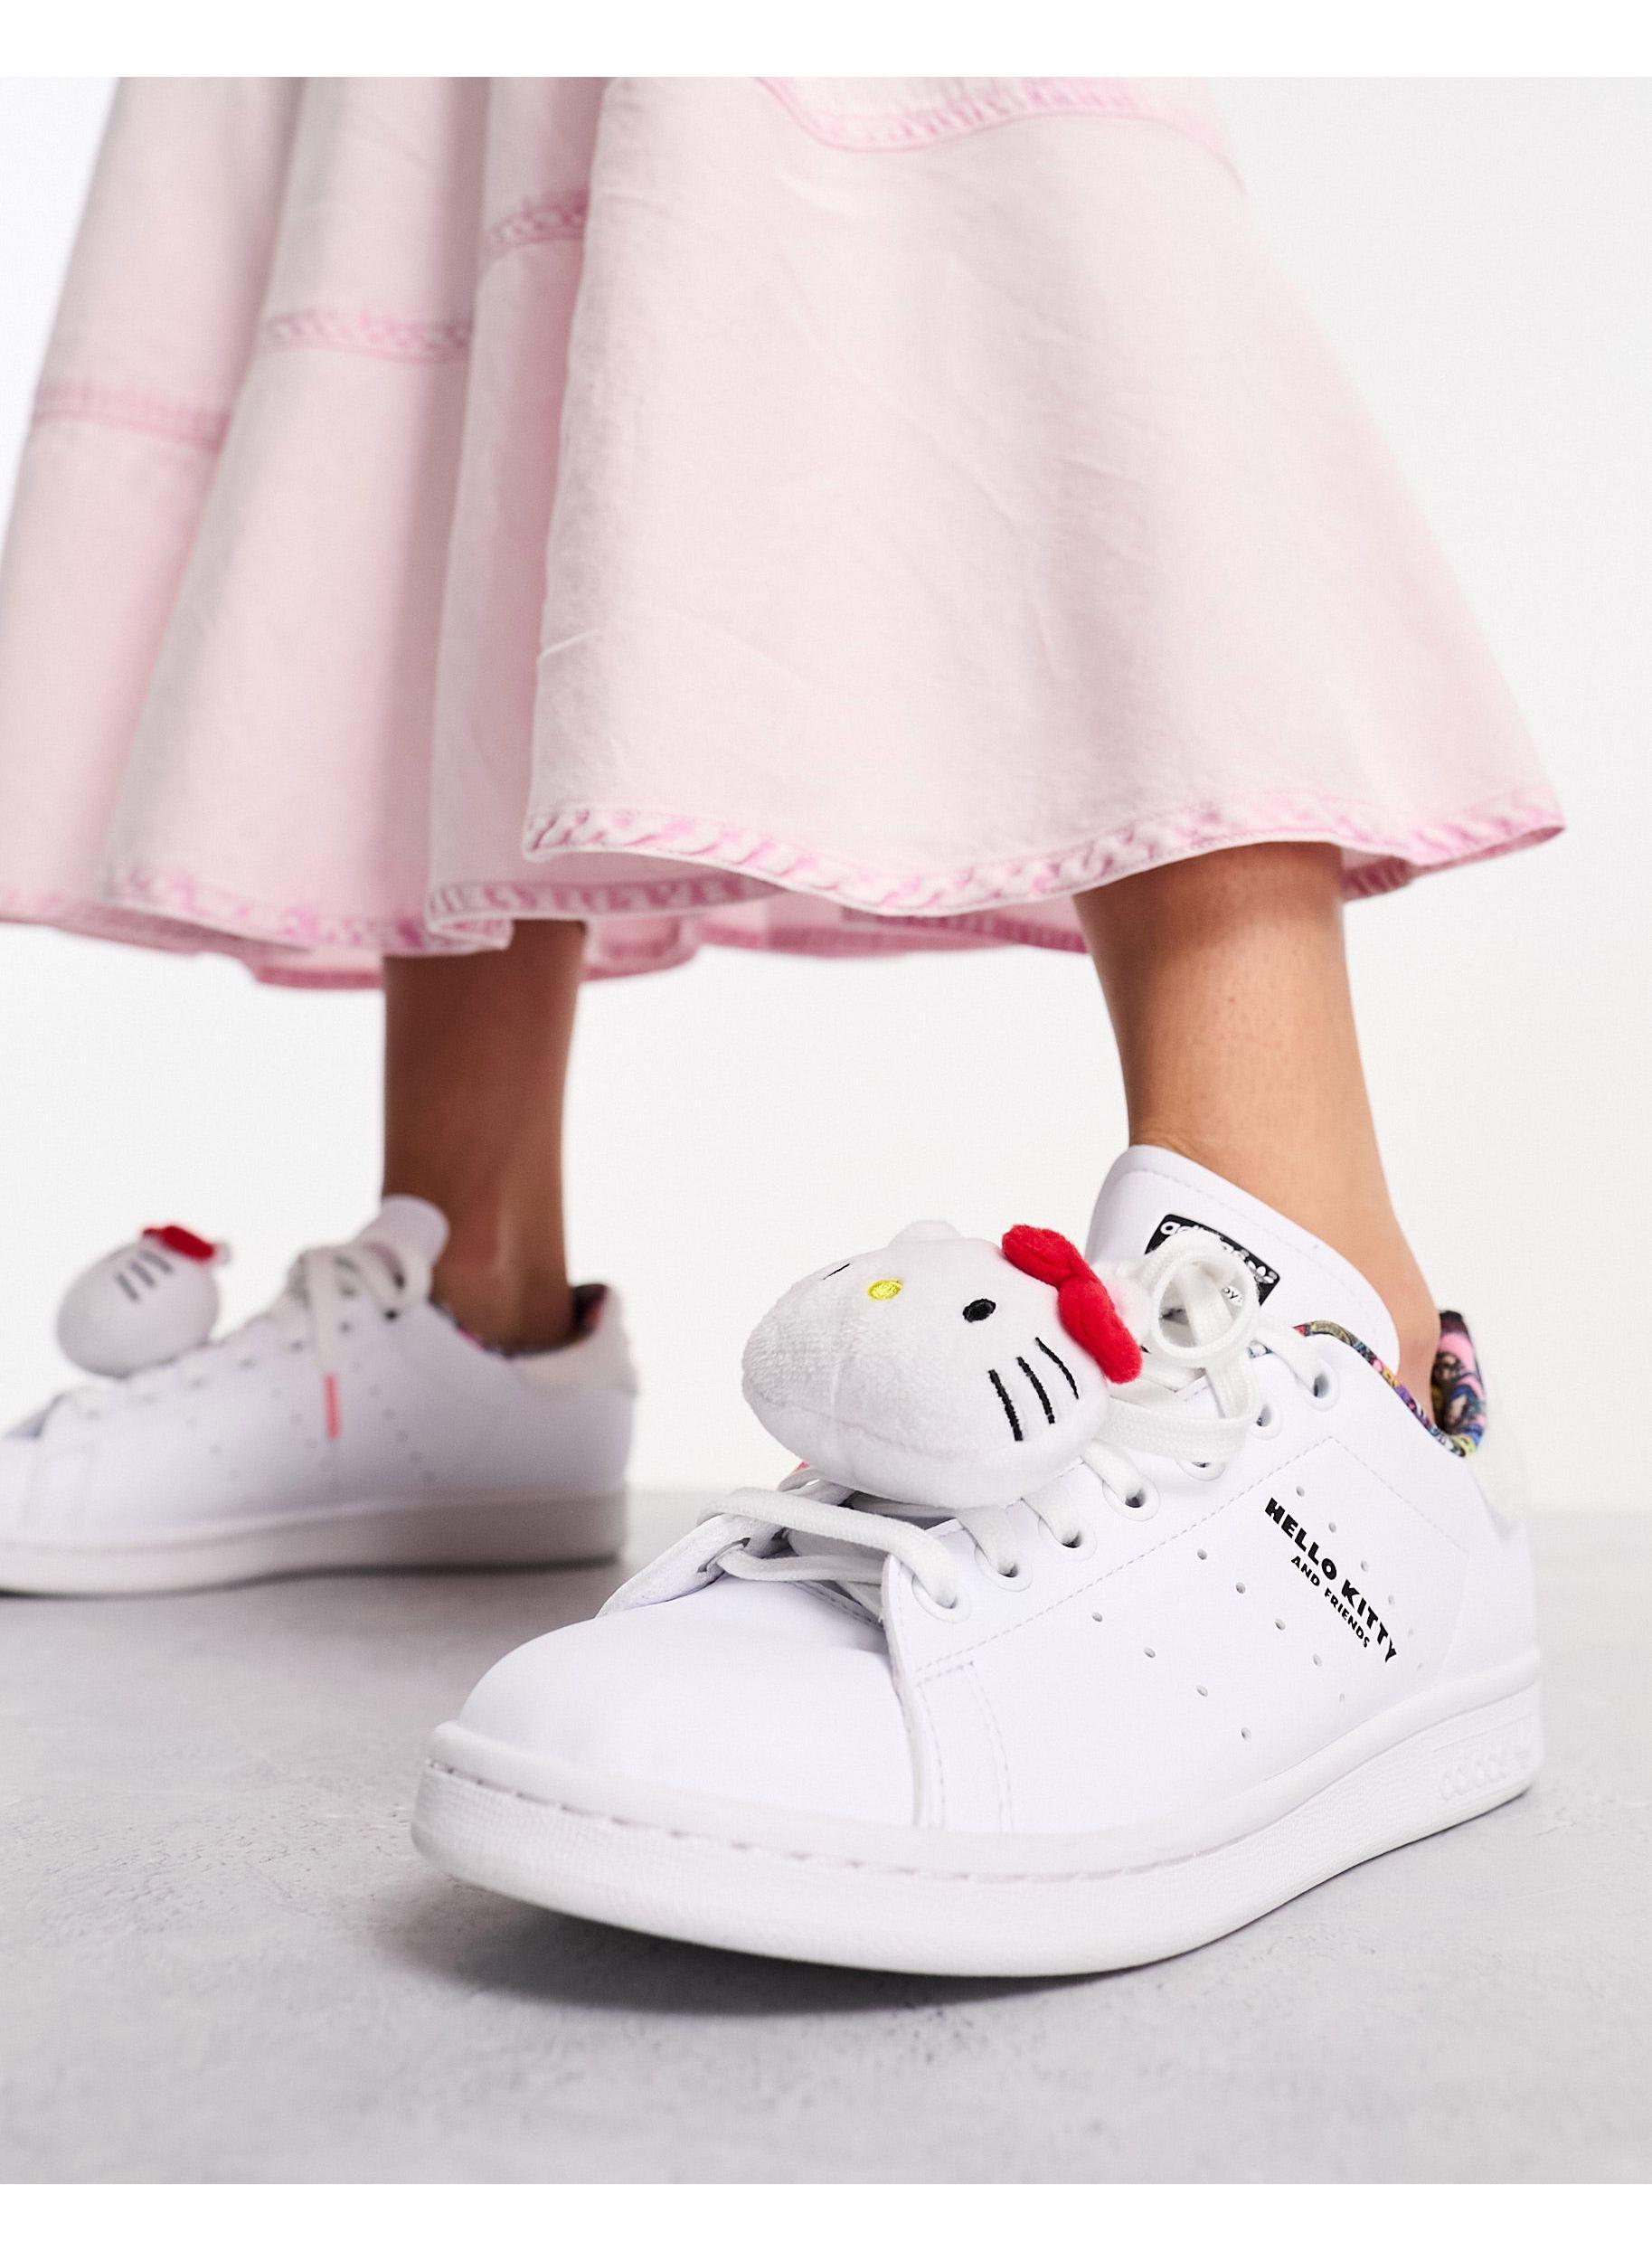 adidas Originals Stan Smith X Hello Kitty Sneakers in White | Lyst